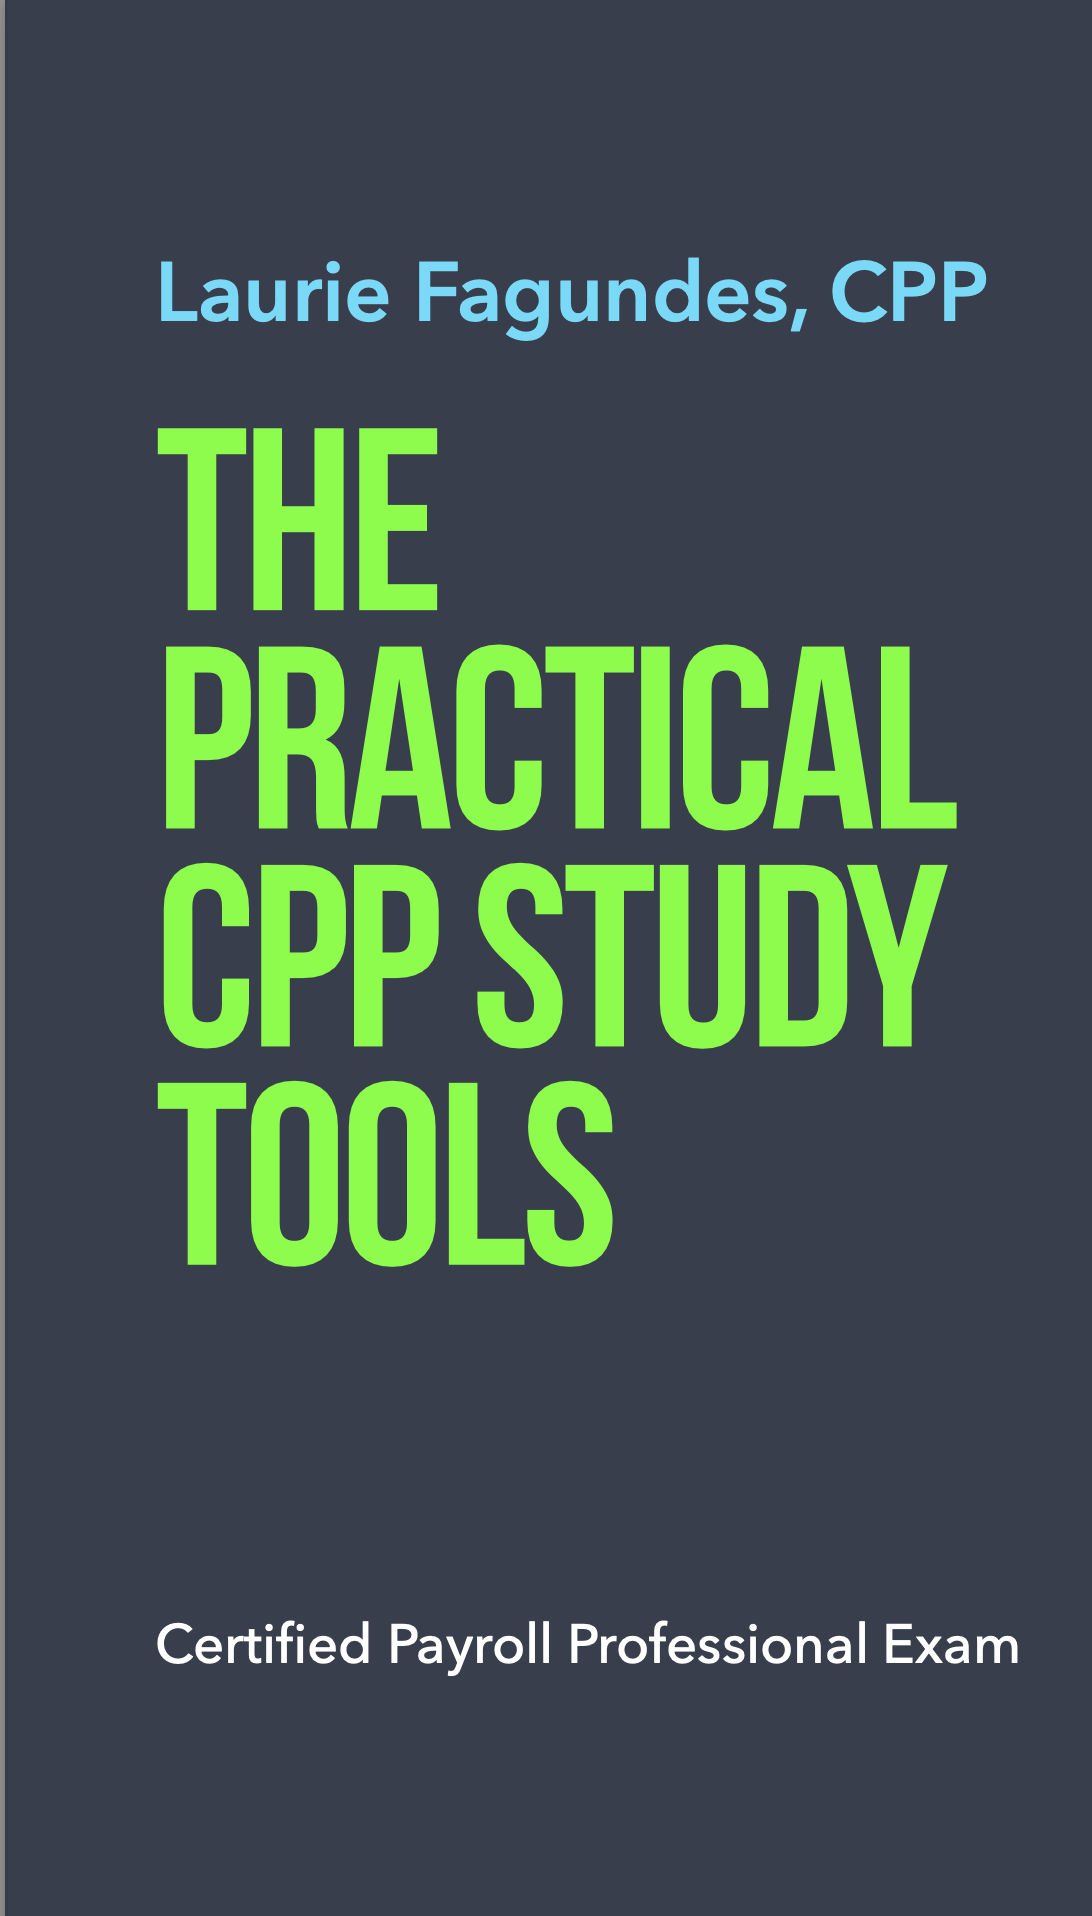 Practical CPP Study Tools